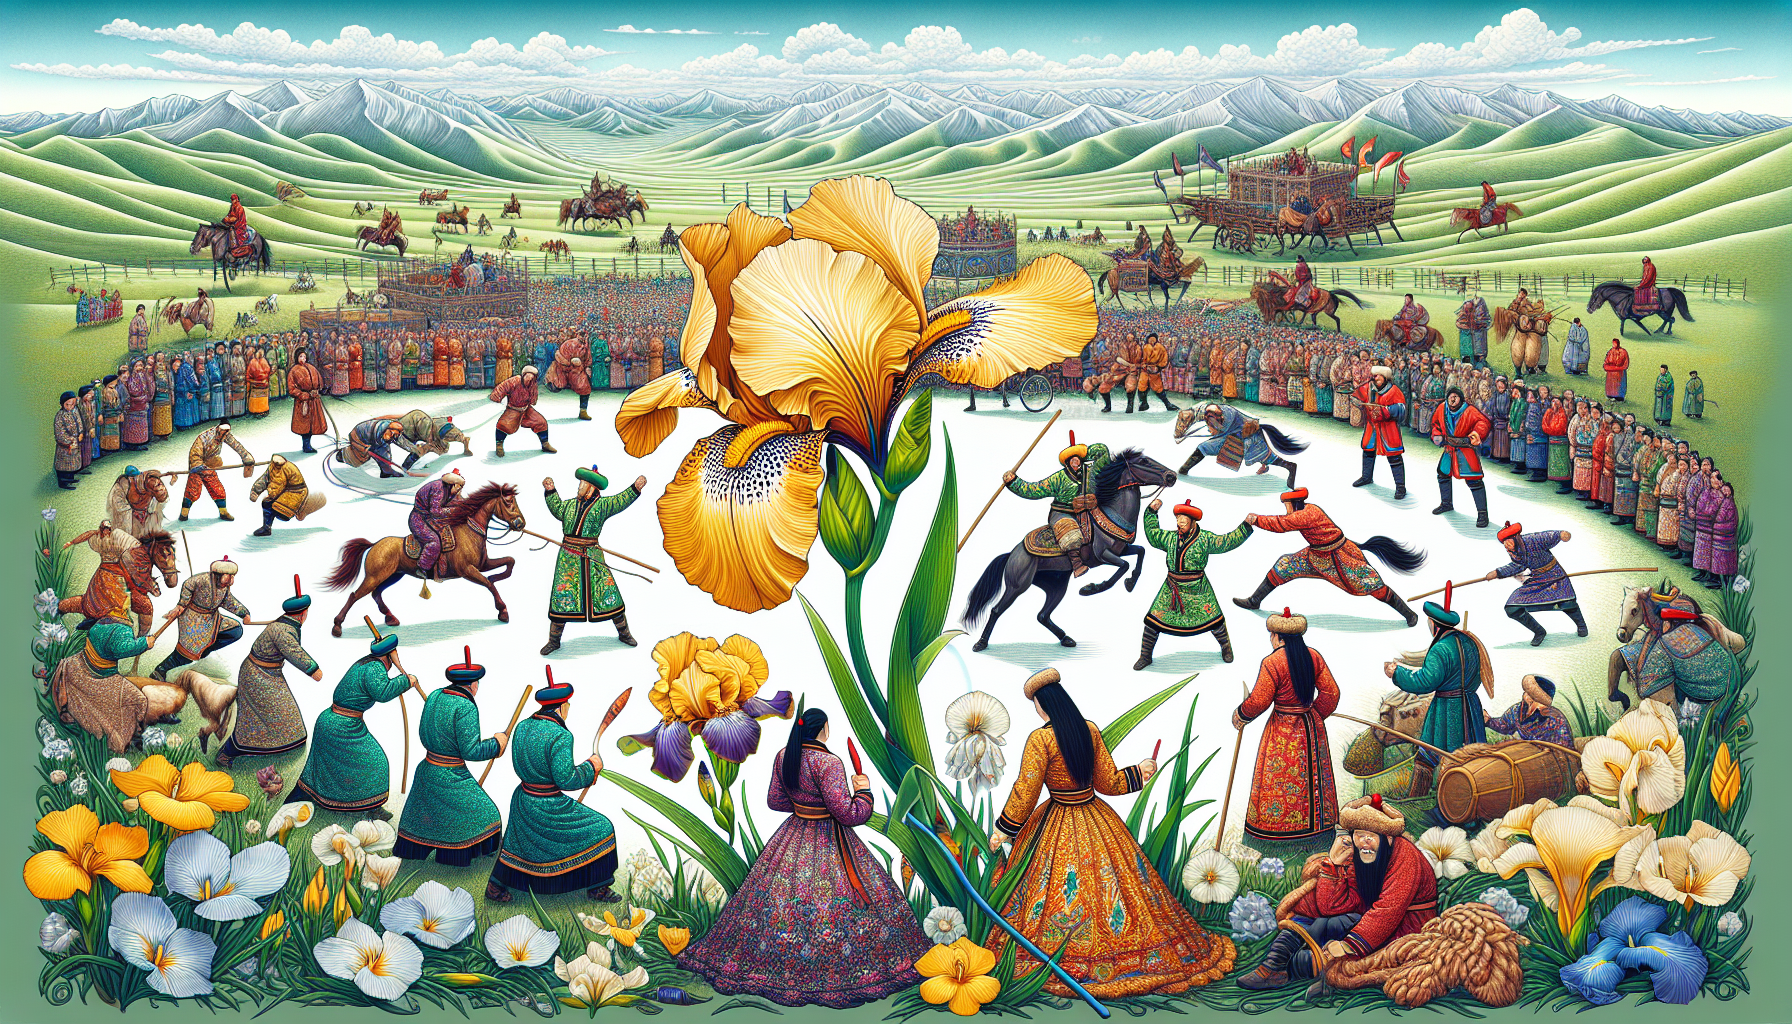 Cultural highlights of spring events in Mongolia